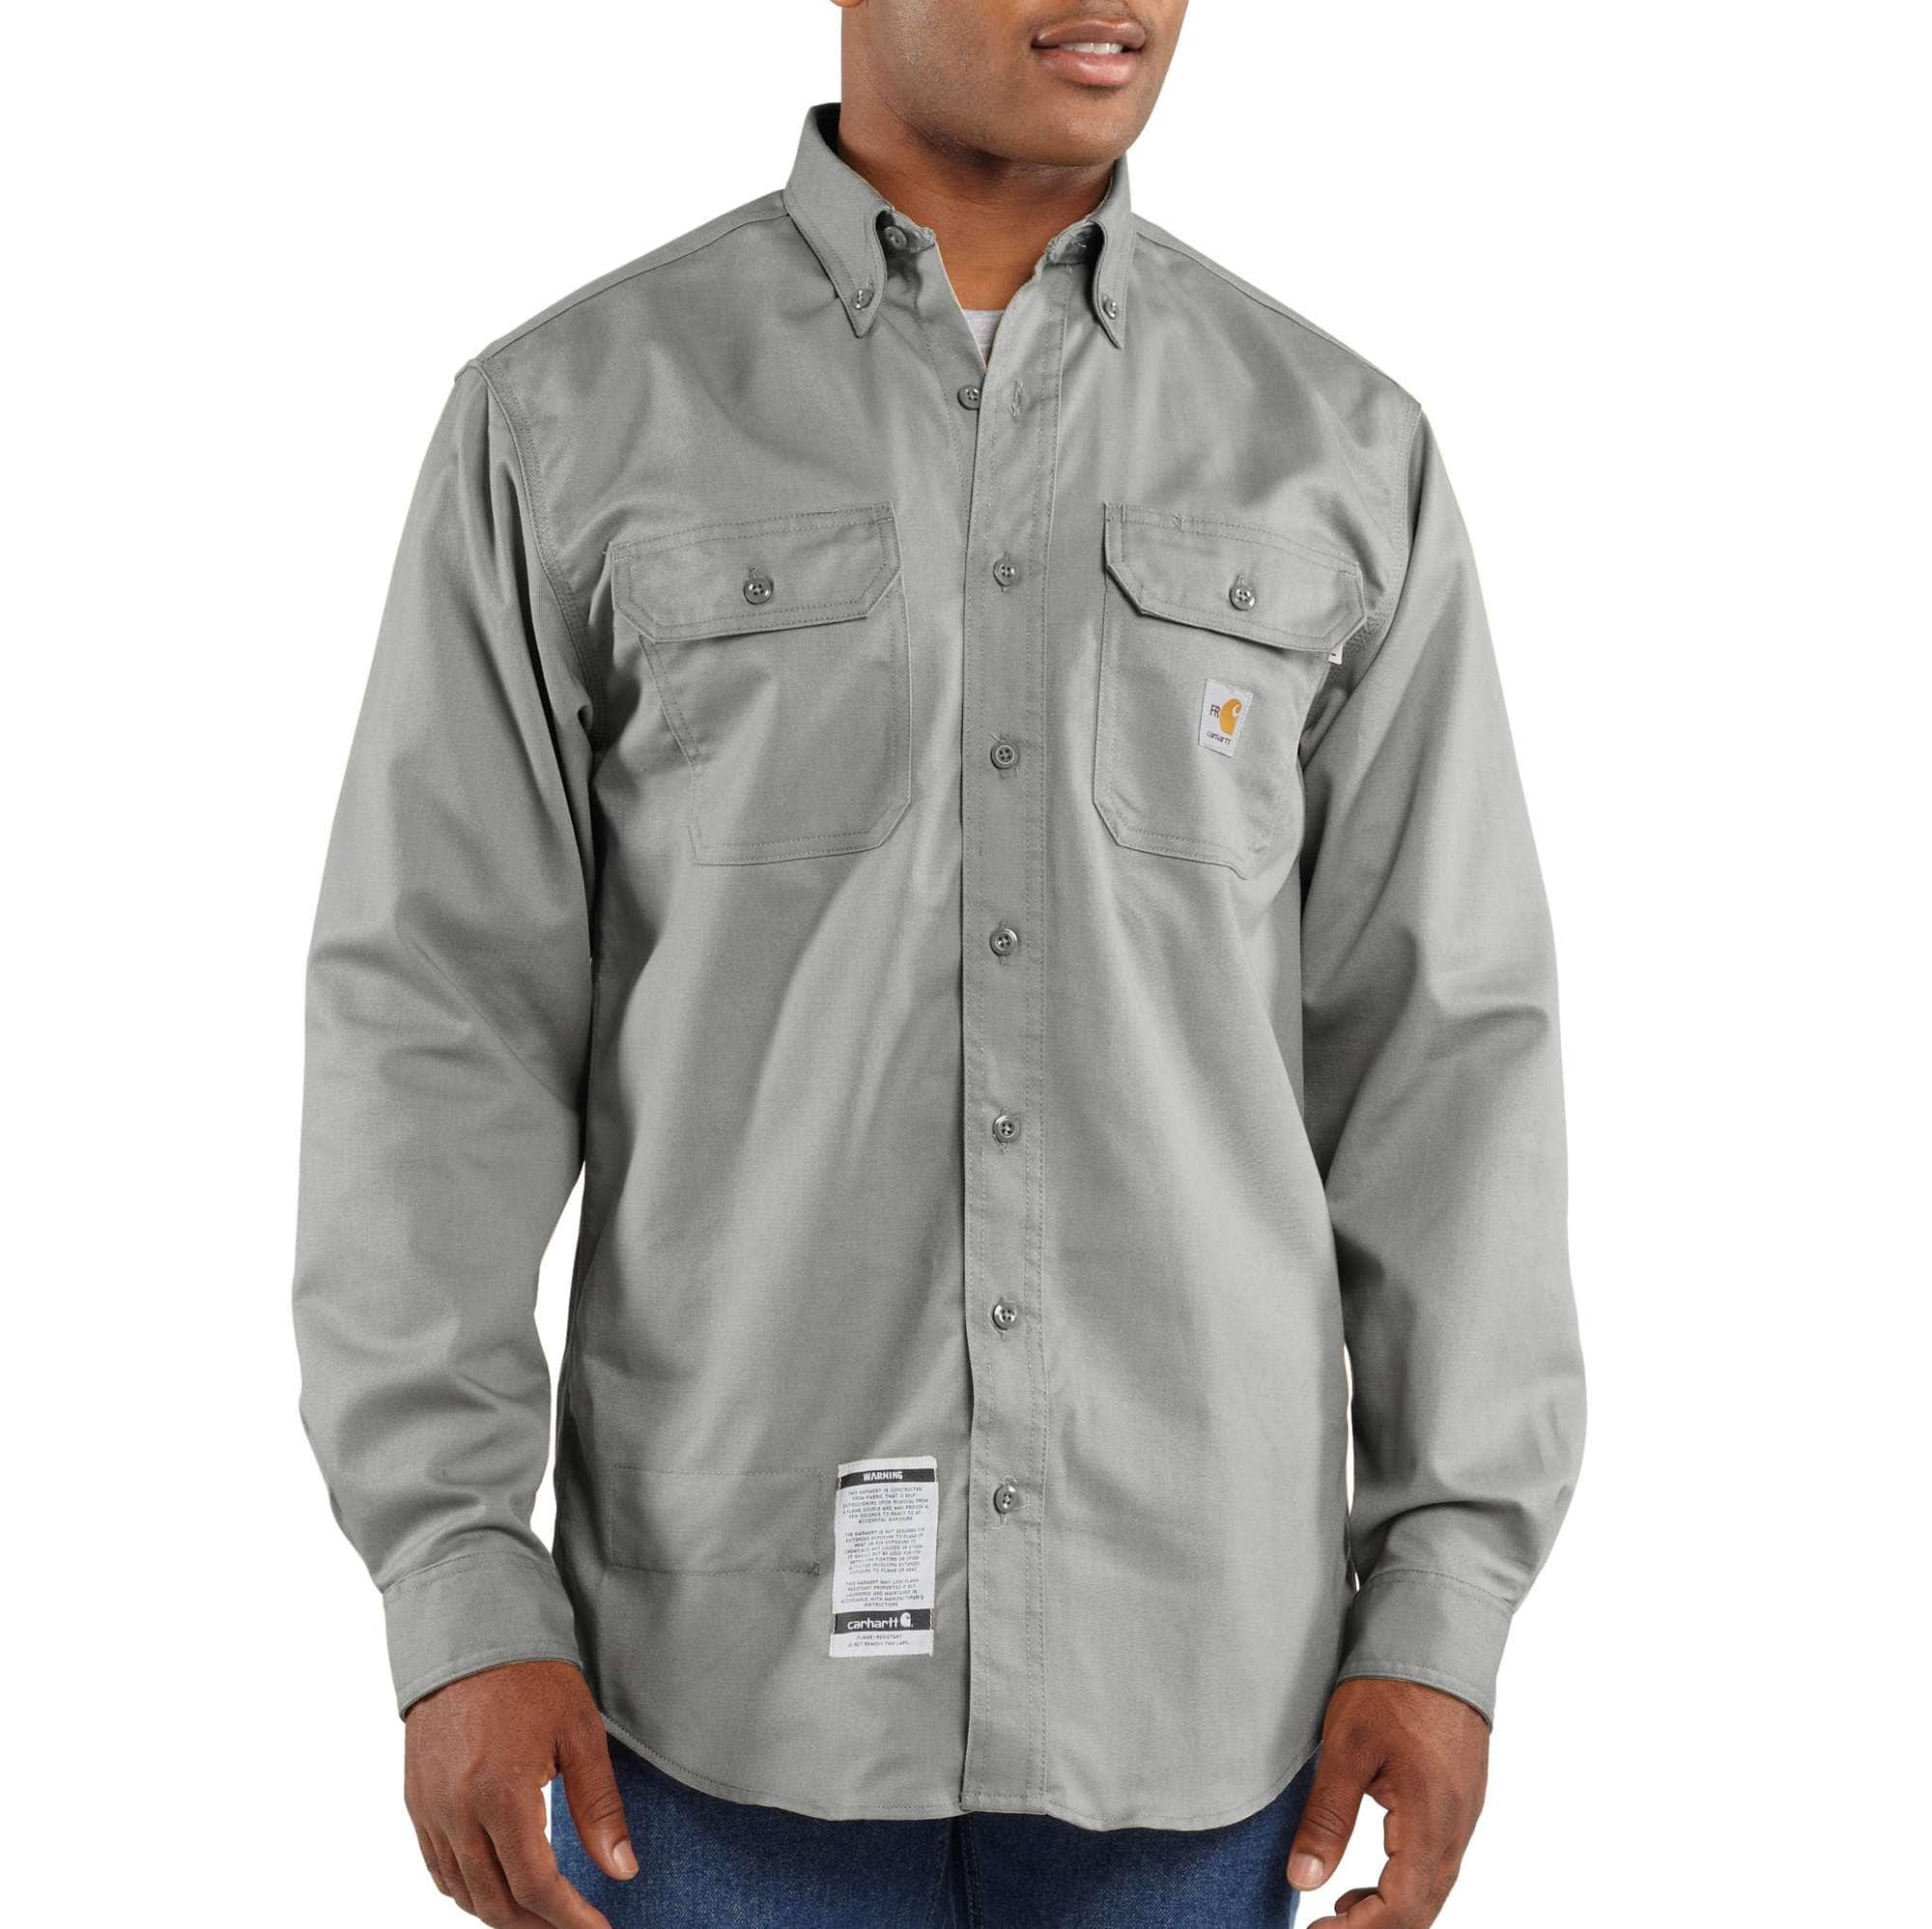 Flame Resistant (FR) Clothing for Work | Carhartt | Carhartt